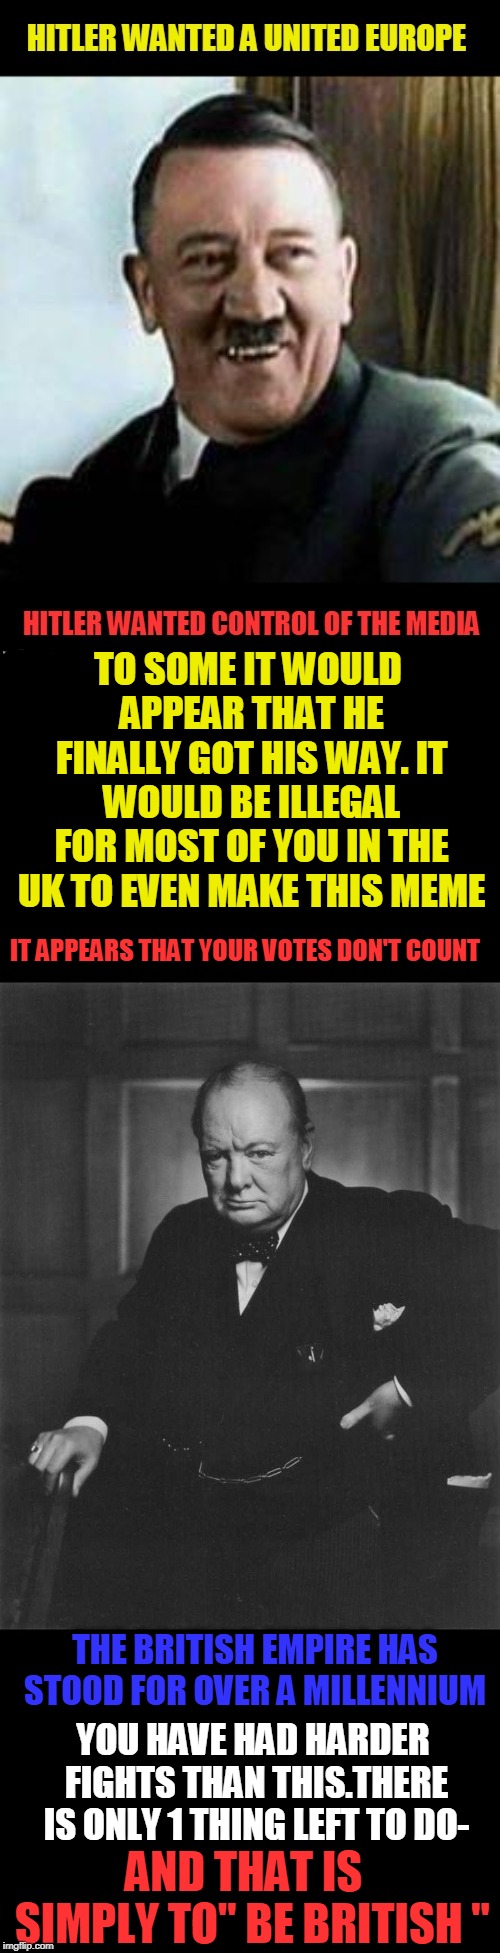 Be British ! | TO SOME IT WOULD APPEAR THAT HE FINALLY GOT HIS WAY. IT WOULD BE ILLEGAL FOR MOST OF YOU IN THE UK TO EVEN MAKE THIS MEME; IT APPEARS THAT YOUR VOTES DON'T COUNT; THE BRITISH EMPIRE HAS STOOD FOR OVER A MILLENNIUM; YOU HAVE HAD HARDER FIGHTS THAN THIS.THERE IS ONLY 1 THING LEFT TO DO-; AND THAT IS  SIMPLY TO" BE BRITISH " | image tagged in british,fight,churchill,european union,brexit,living on a thin line | made w/ Imgflip meme maker